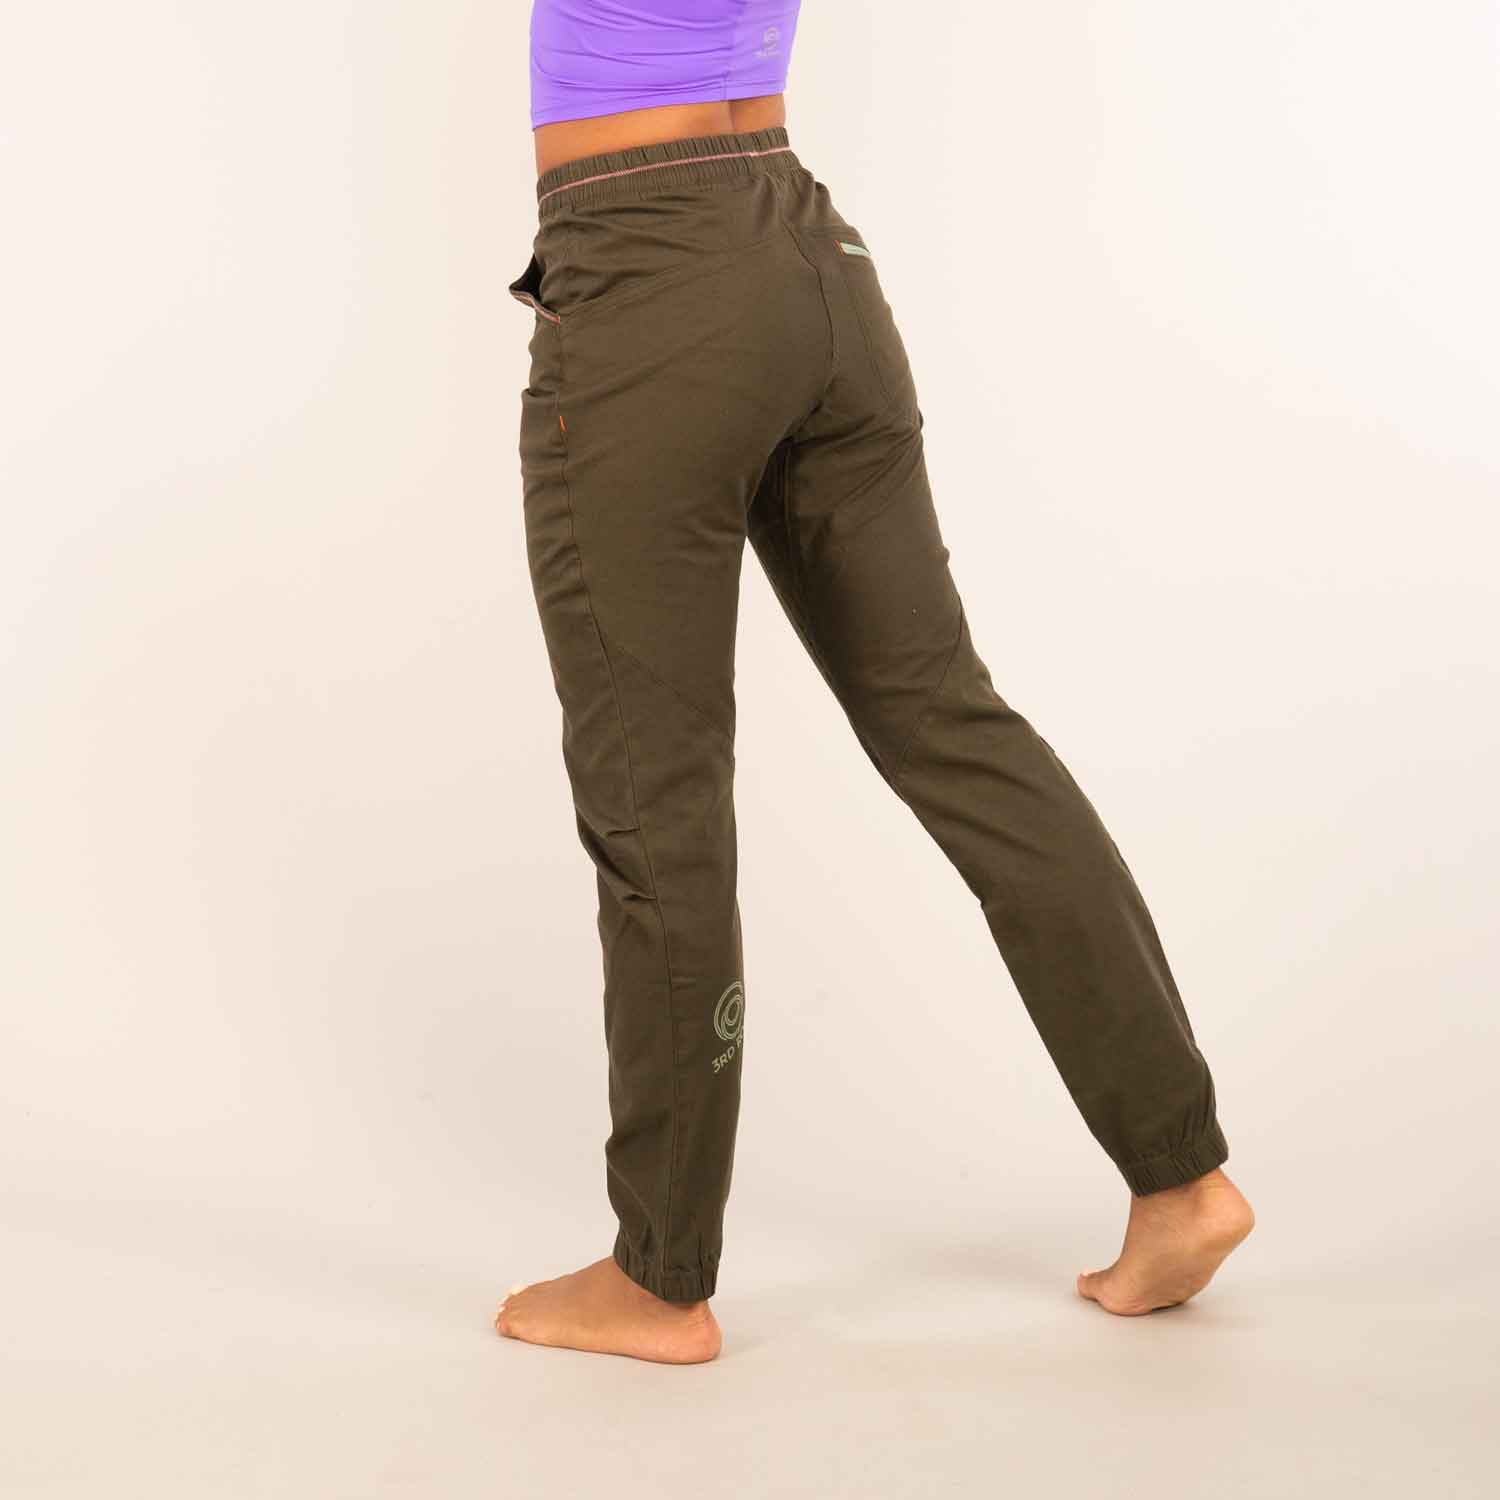 MARGO Adventure Trousers | Organic Cotton Outdoor Trousers | 3RD ROCK Clothing - Kendal is 5ft 7" with a 28" waist, 38" hips and wears a size 30/RL. F